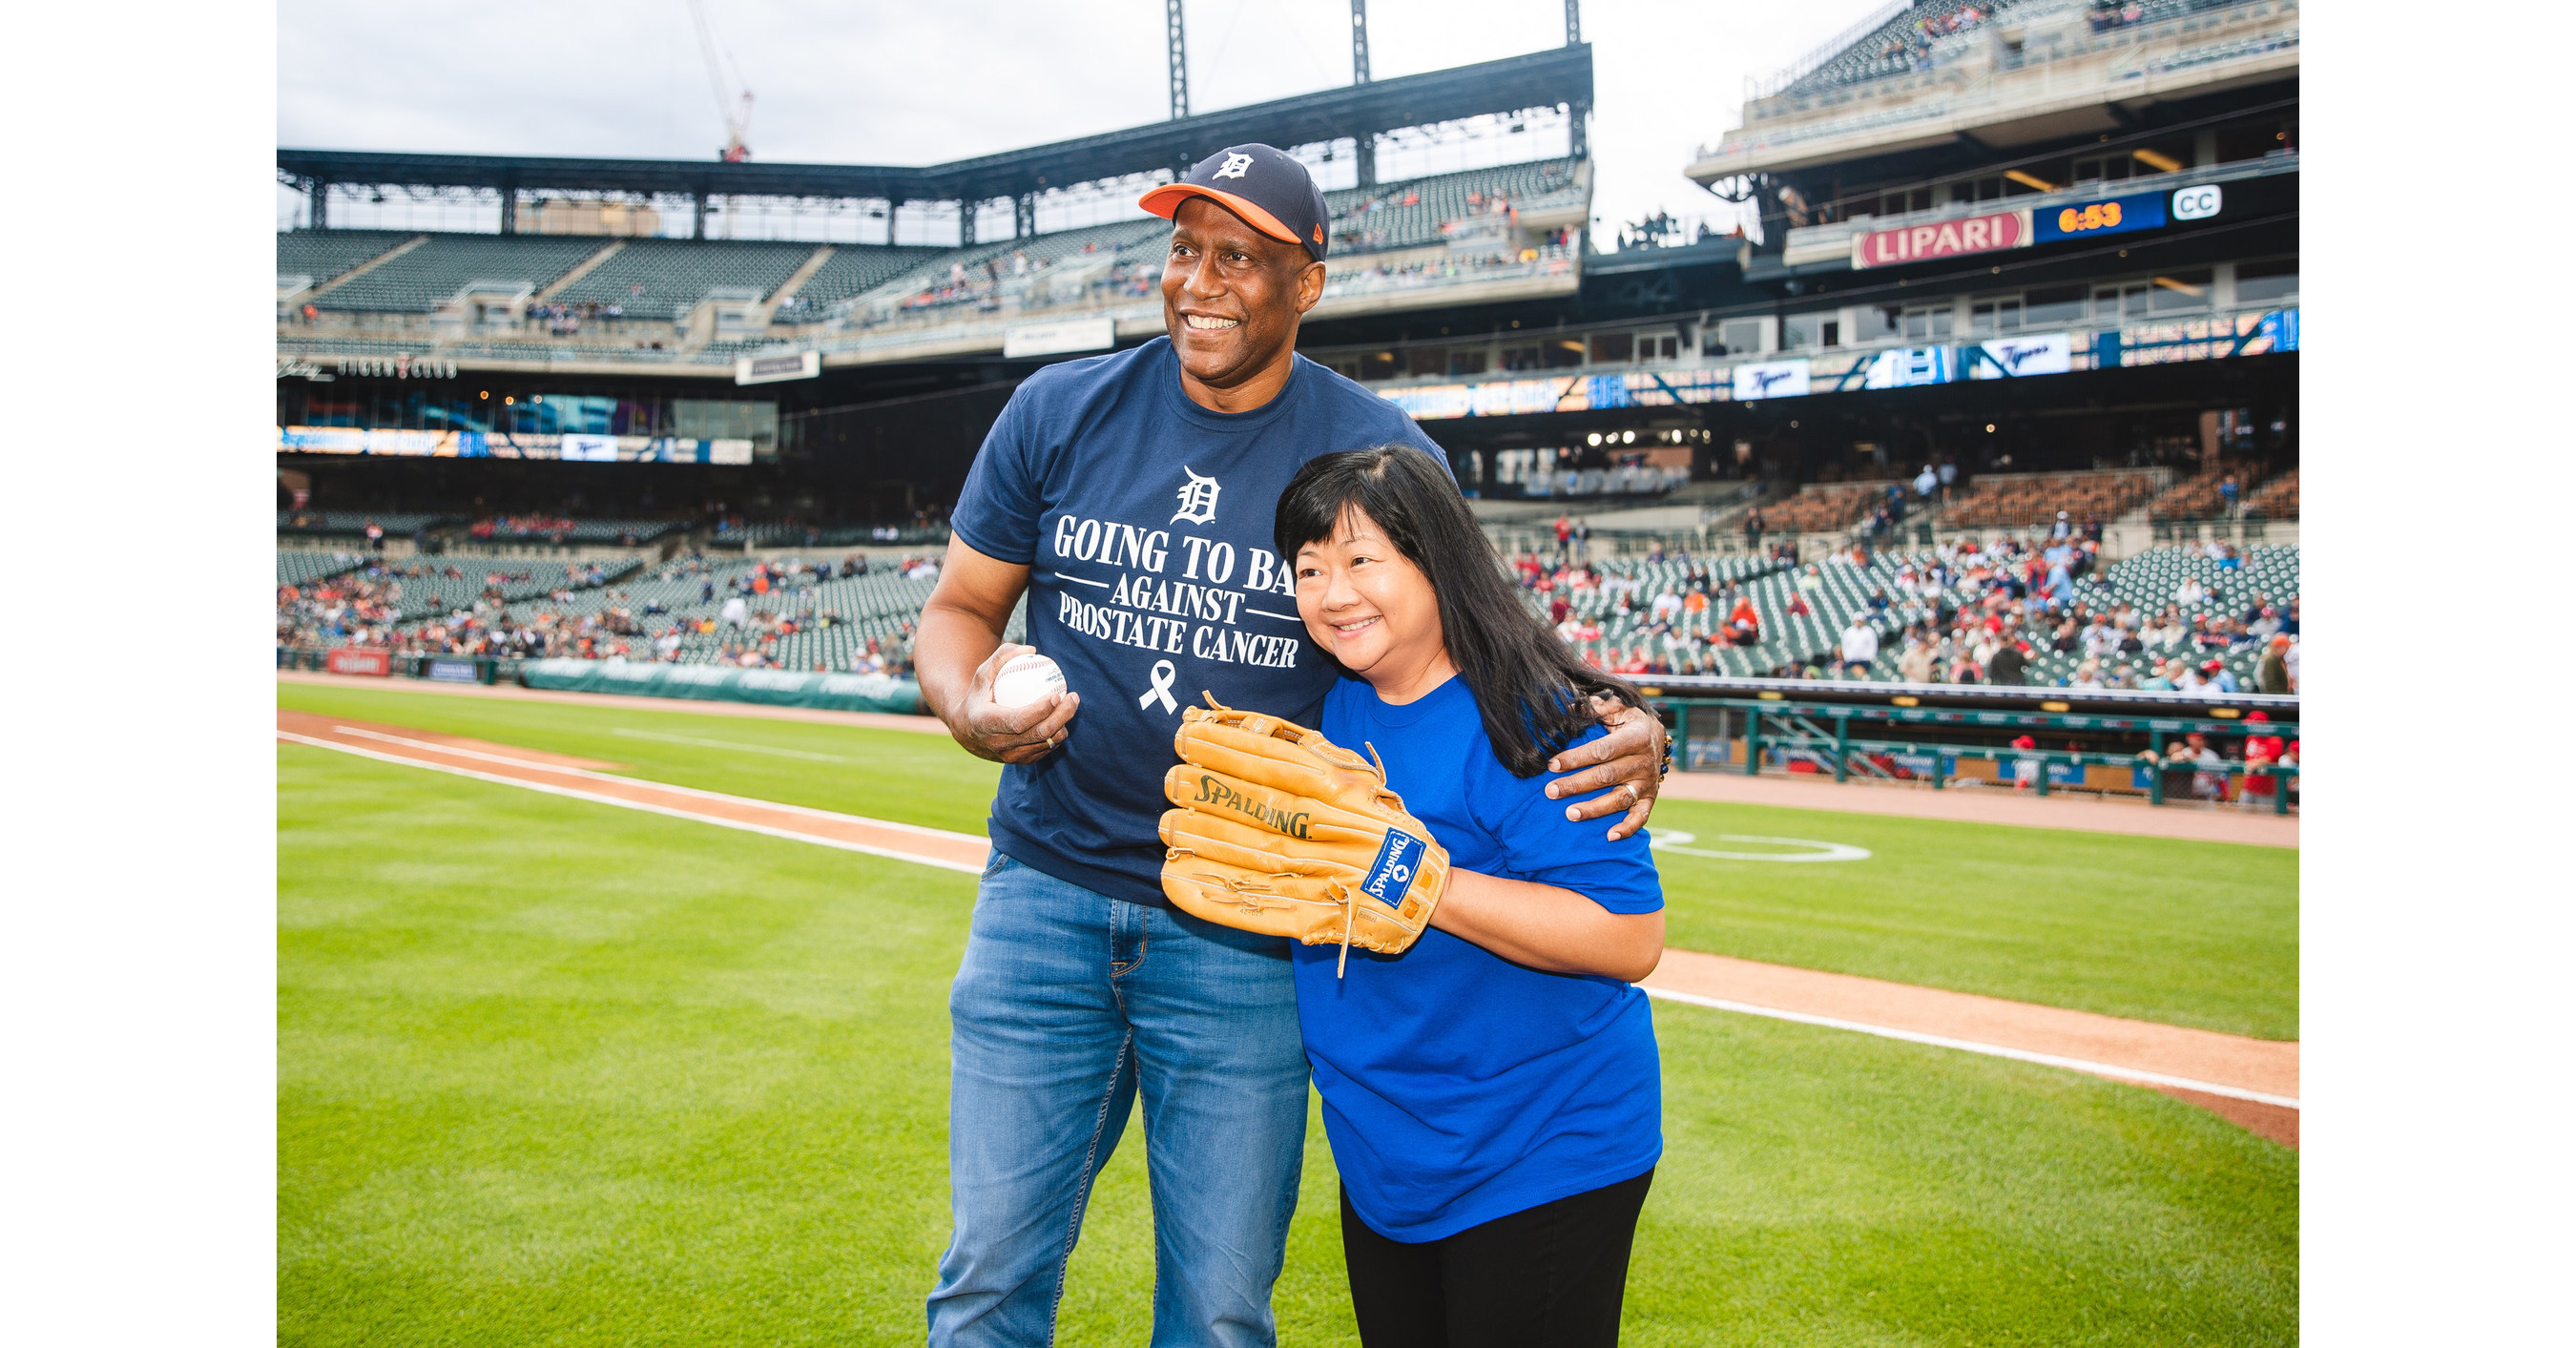 Karmanos Cancer Institute and the Detroit Tigers honor survivors